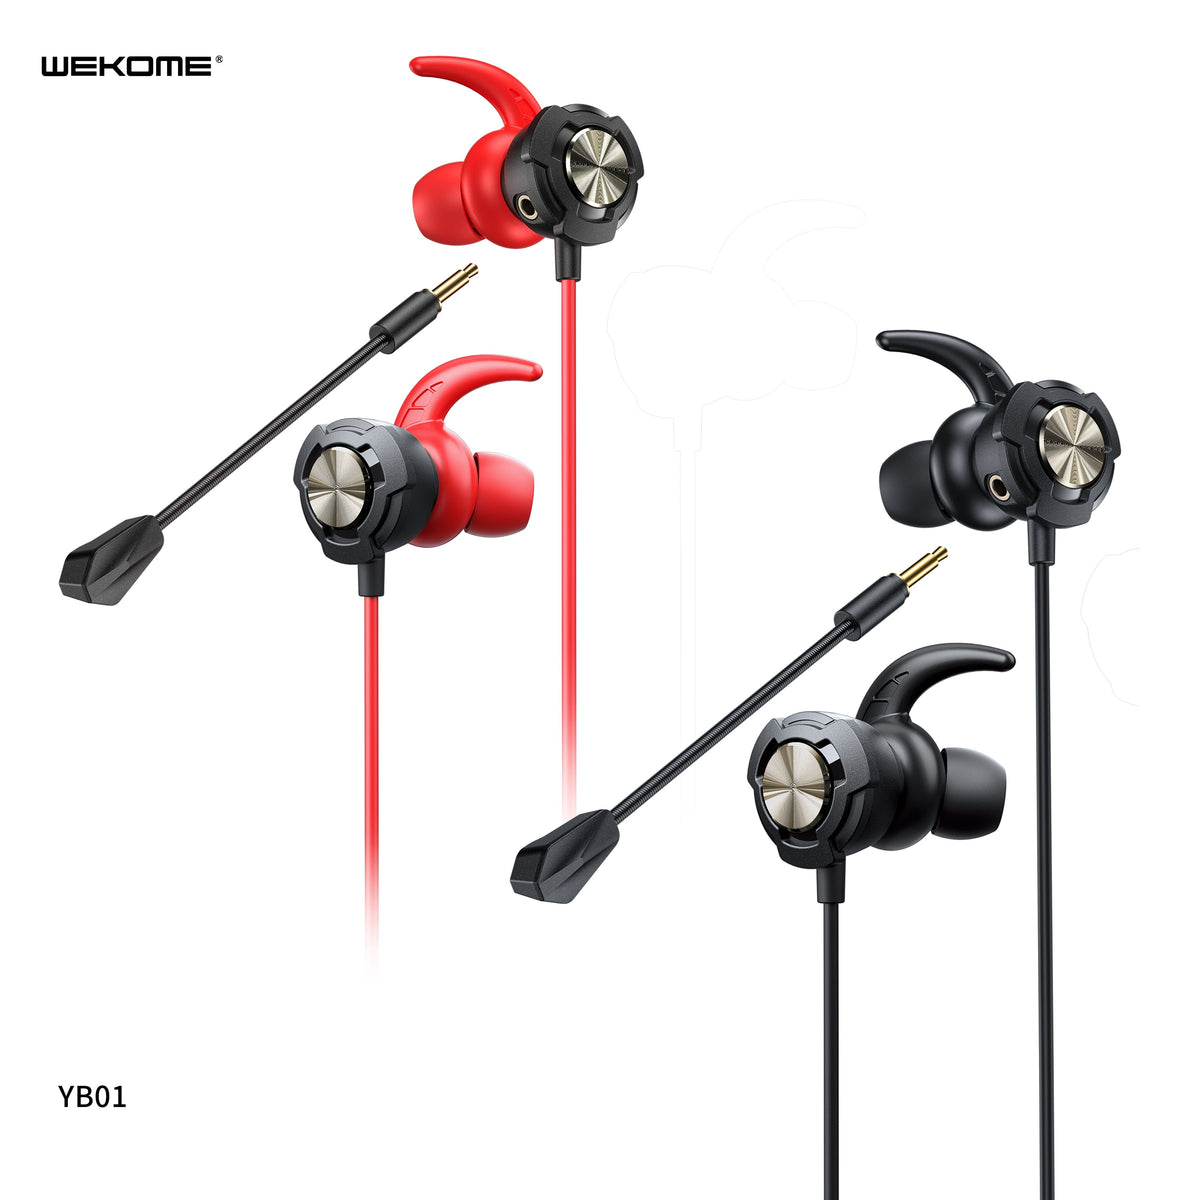 WK YB01 RAIDERS GAMING SERIES IN EAR (WIRED) EARPHONE FOR GAMES WITH MIC - Black